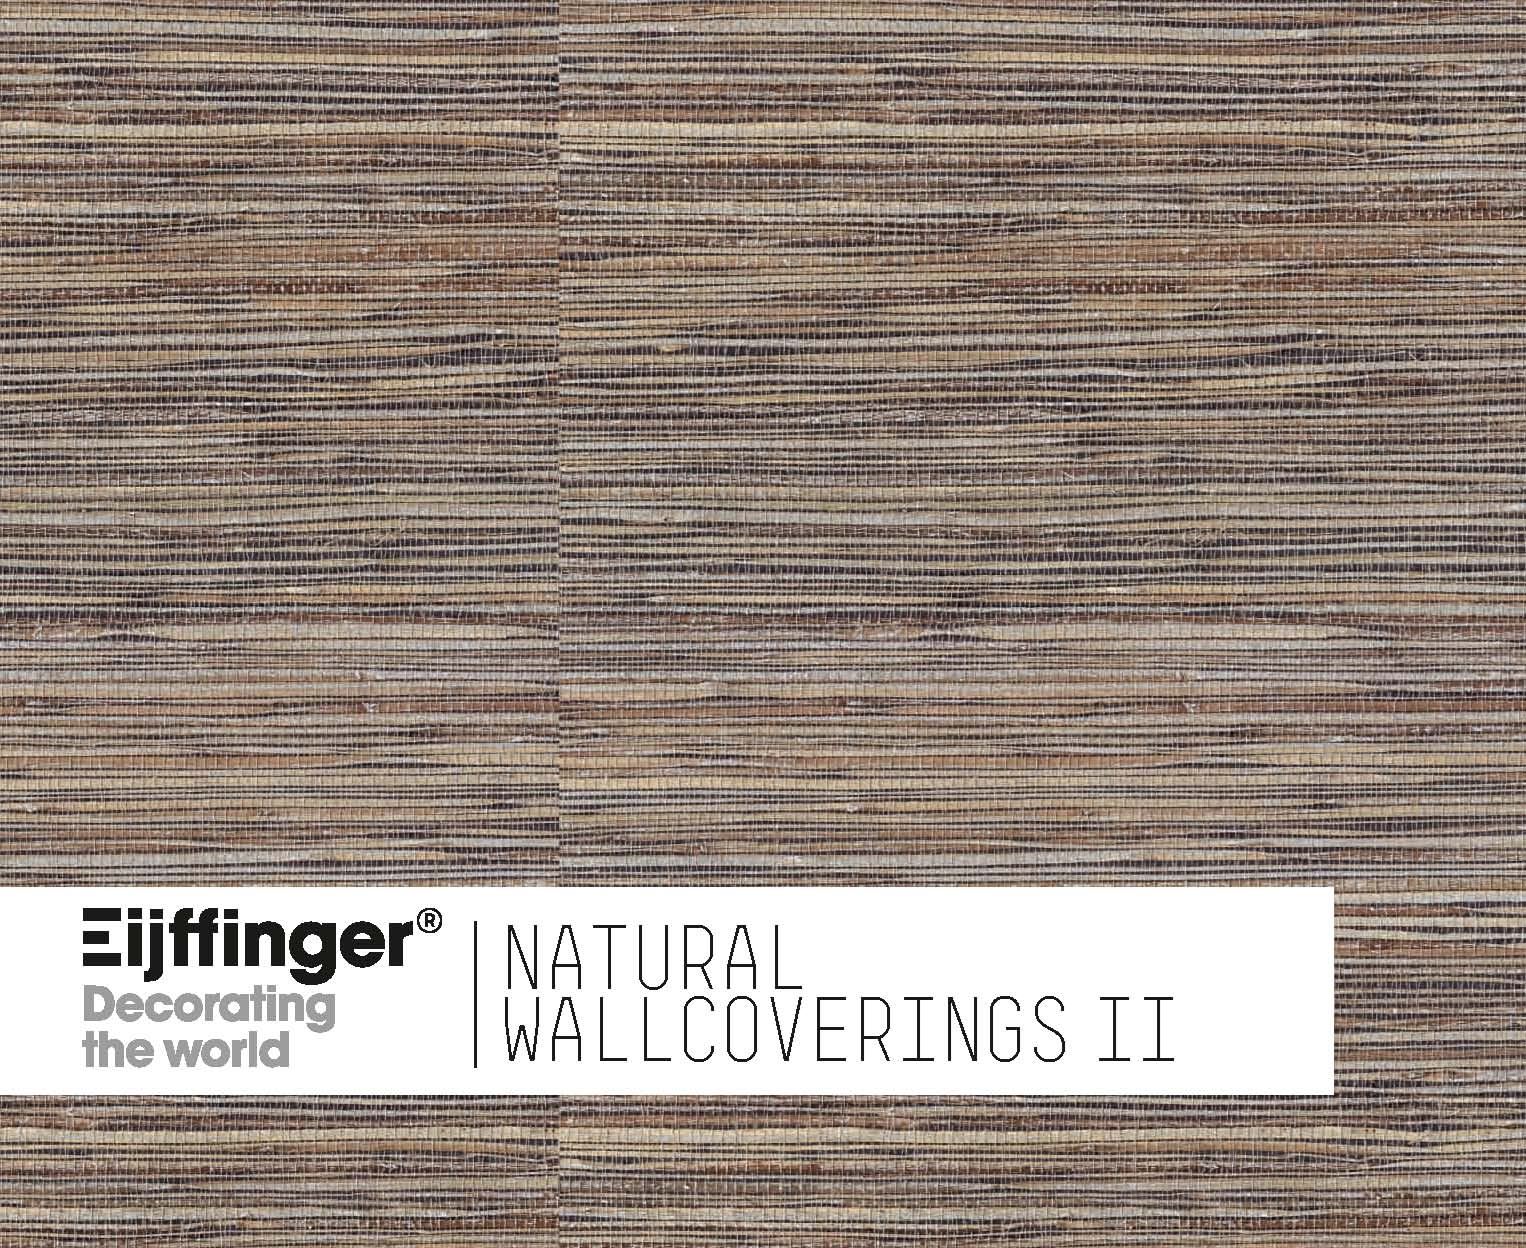 Root categorie - Natural Wallcoverings II